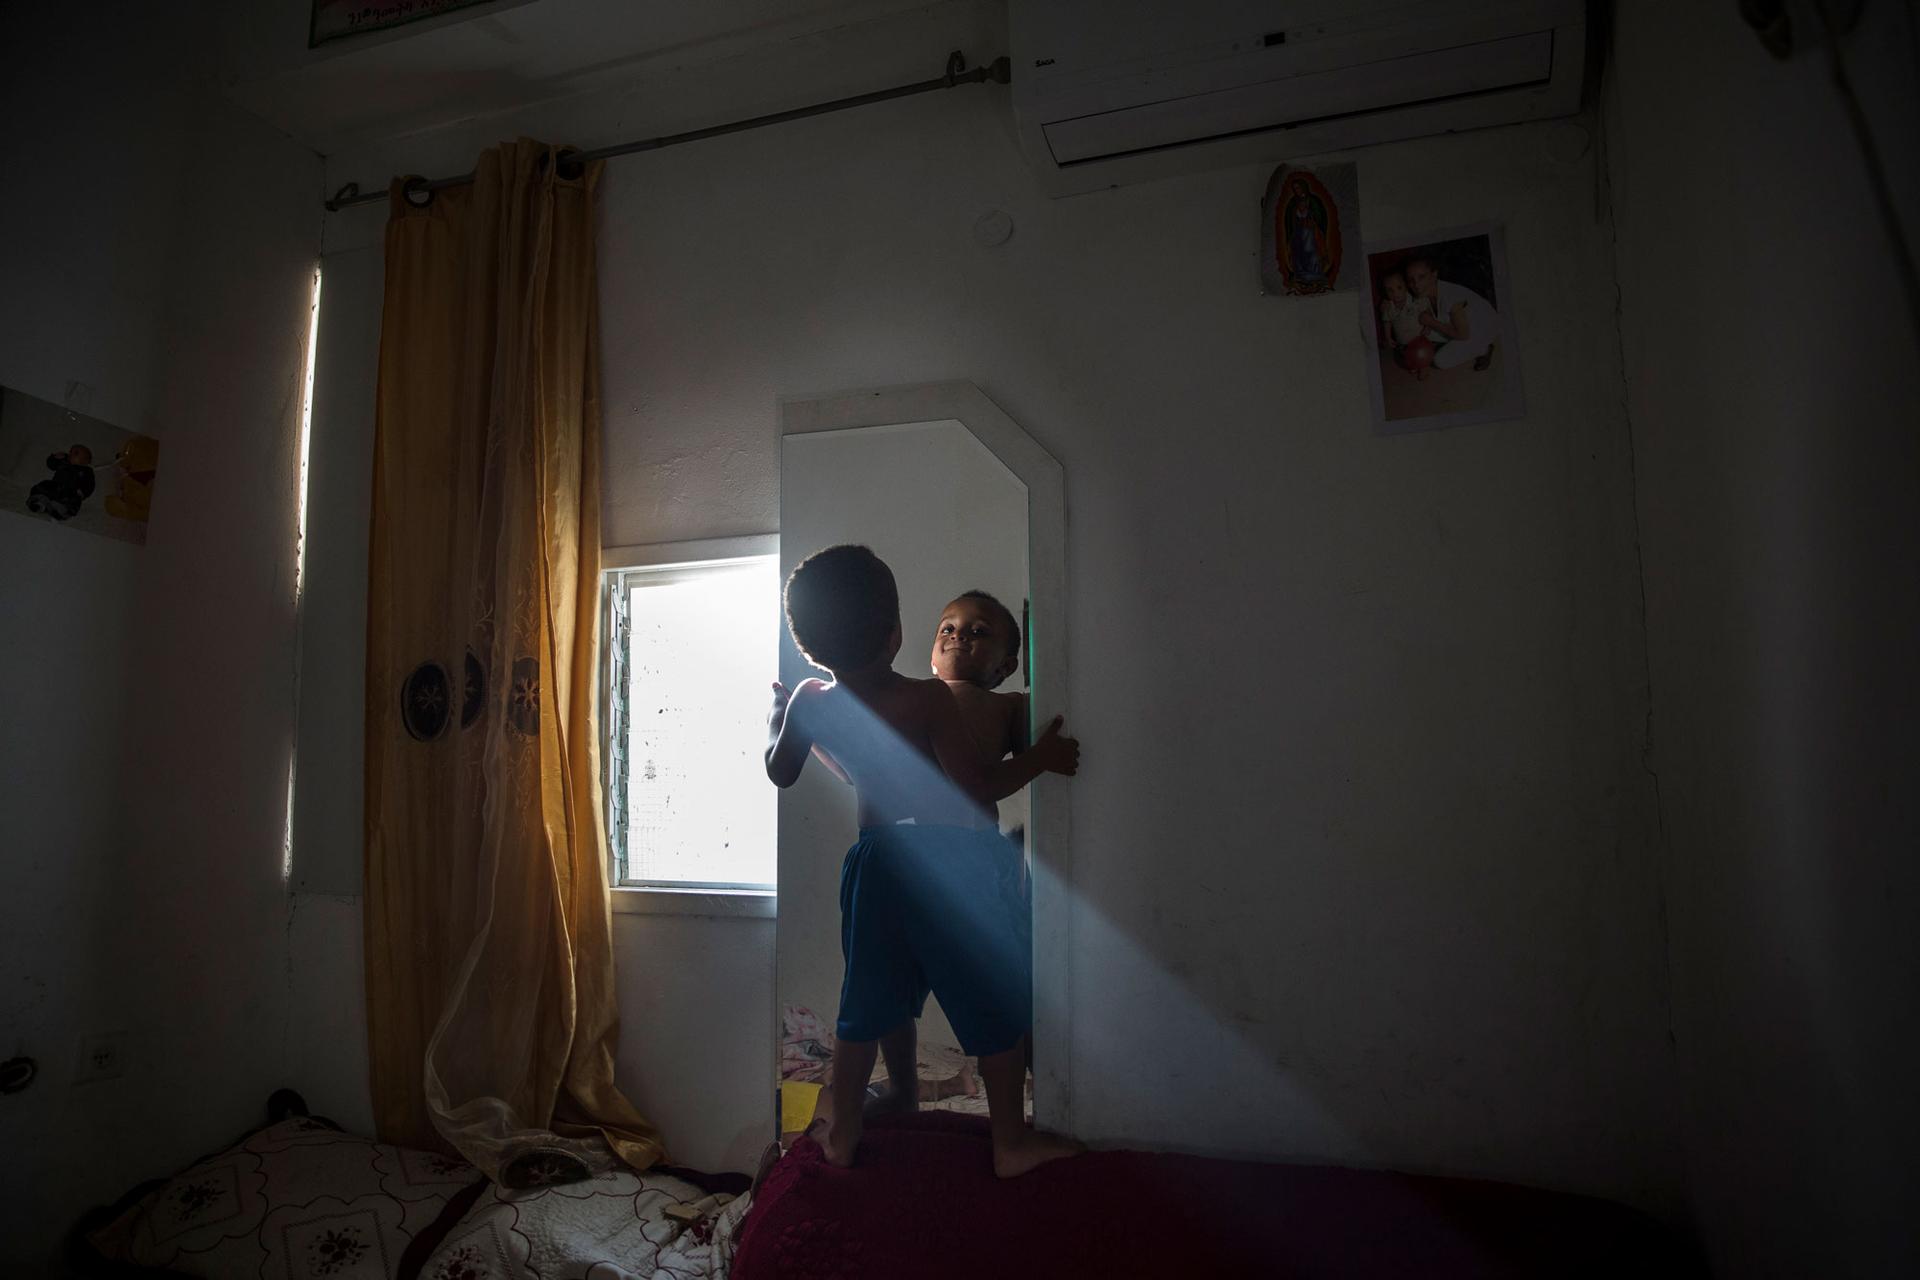 Tariki Gebru, 4, looking in the mirror in the small room he shares with his mother and younger brother in the Shapiro neighborhood of Tel Aviv.